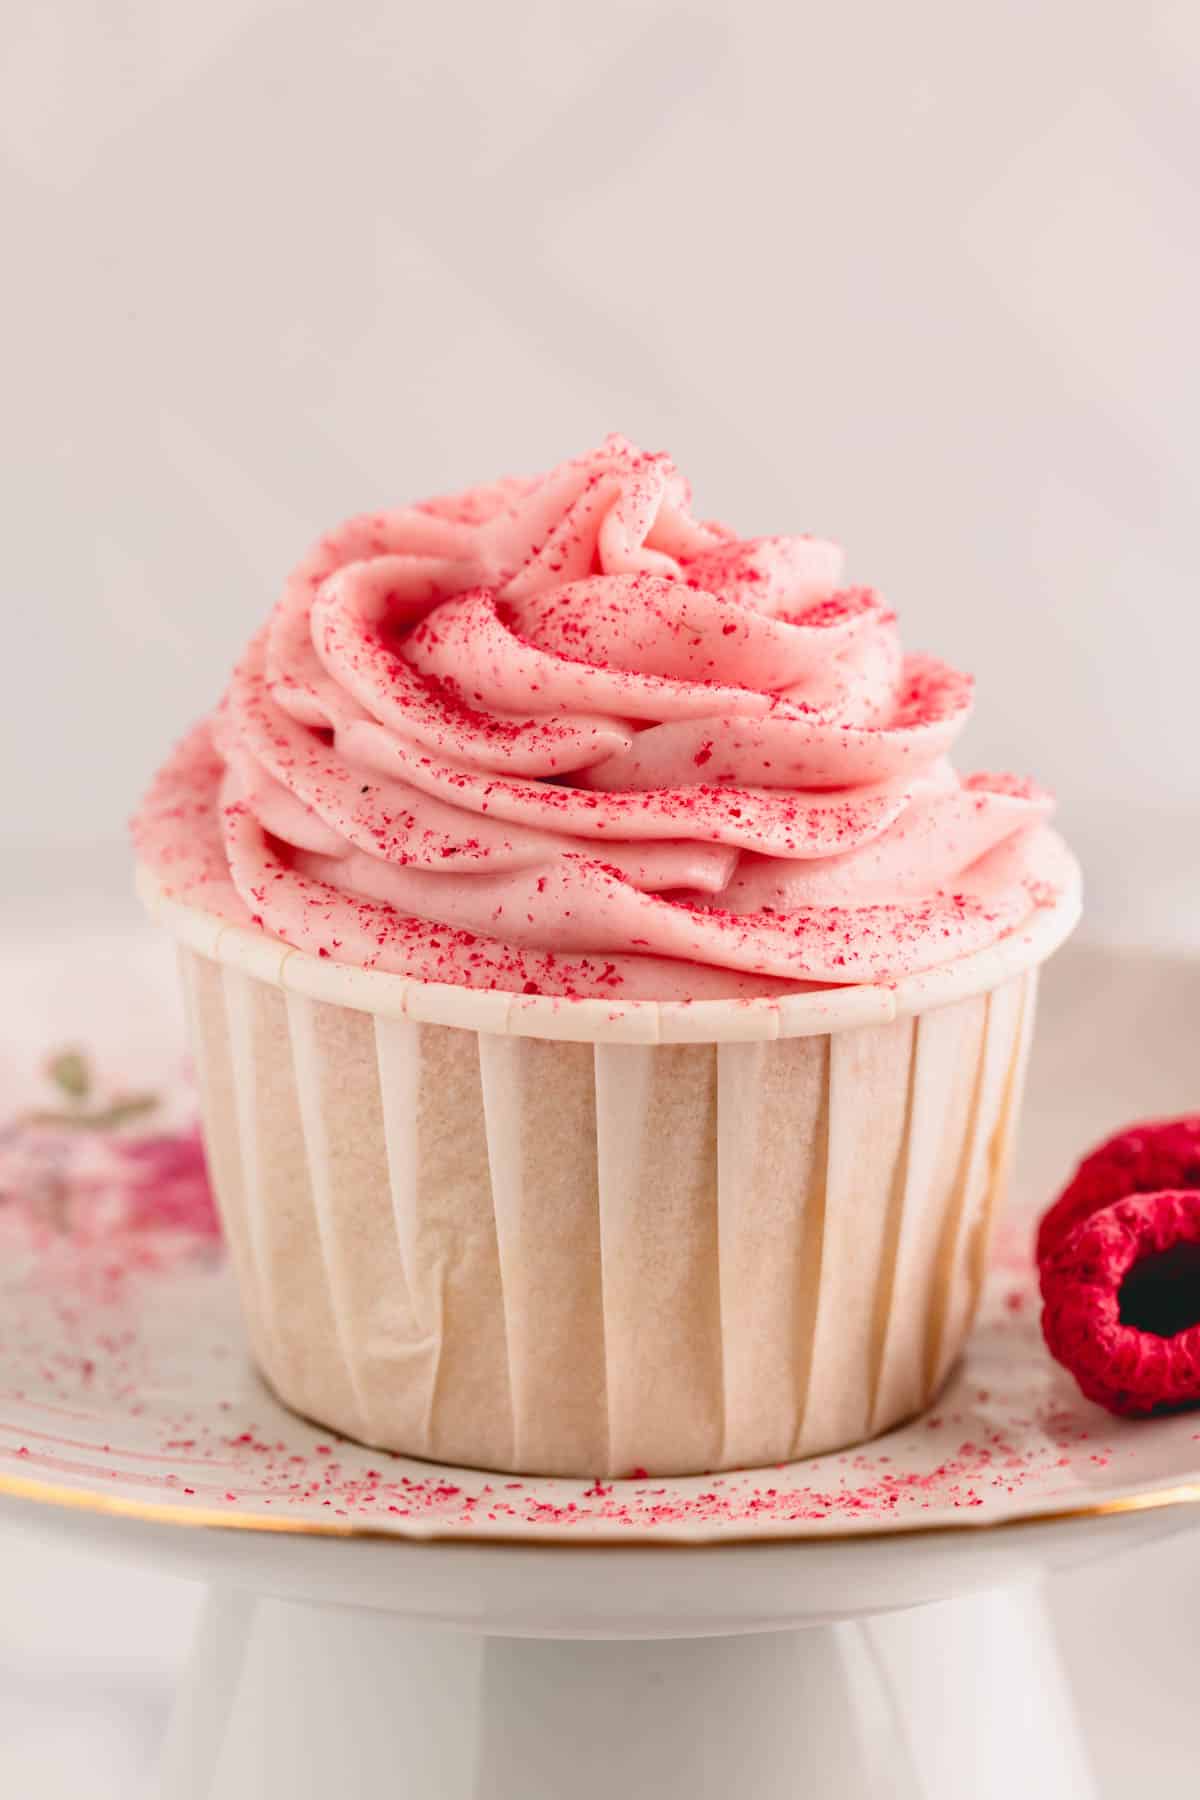 A cup of raspberry cream cheese frosting dusted with crushed raspberries.